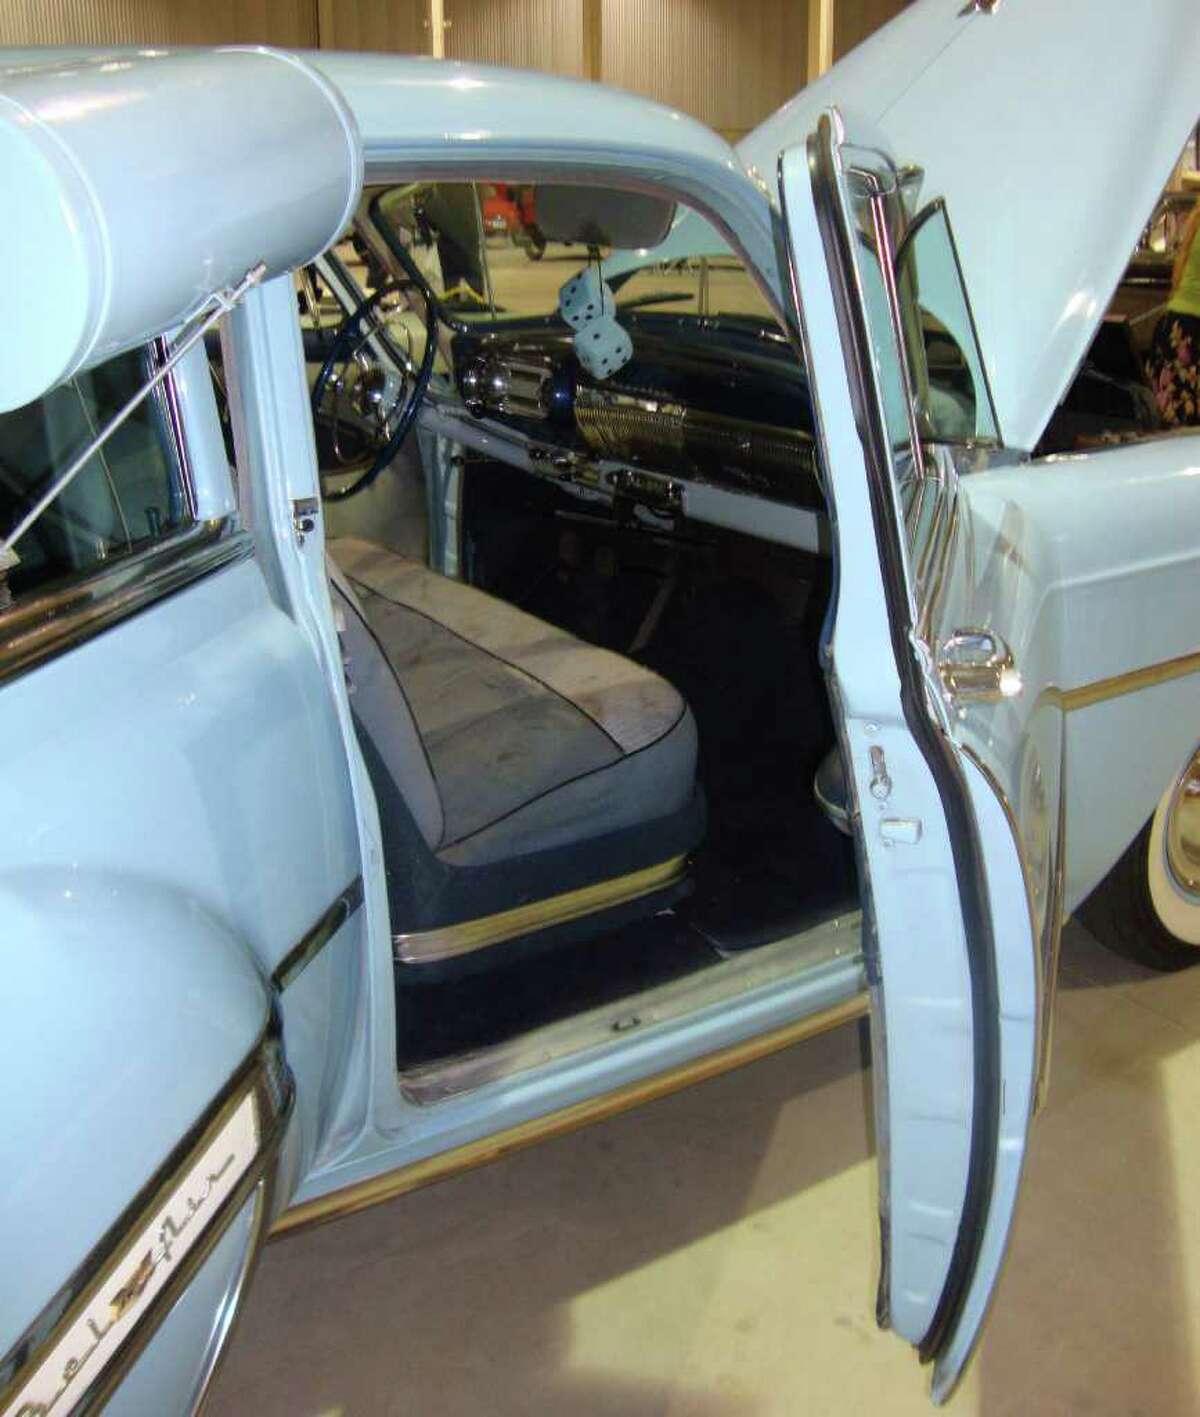 This 1953 Chevrolet Bel Air four-door sedan, completed with window-mounted air cooler, is all original except for the paint. It has only 76,390 miles on it, said the owners, Chandra and Jason Fryer of San Antonio.